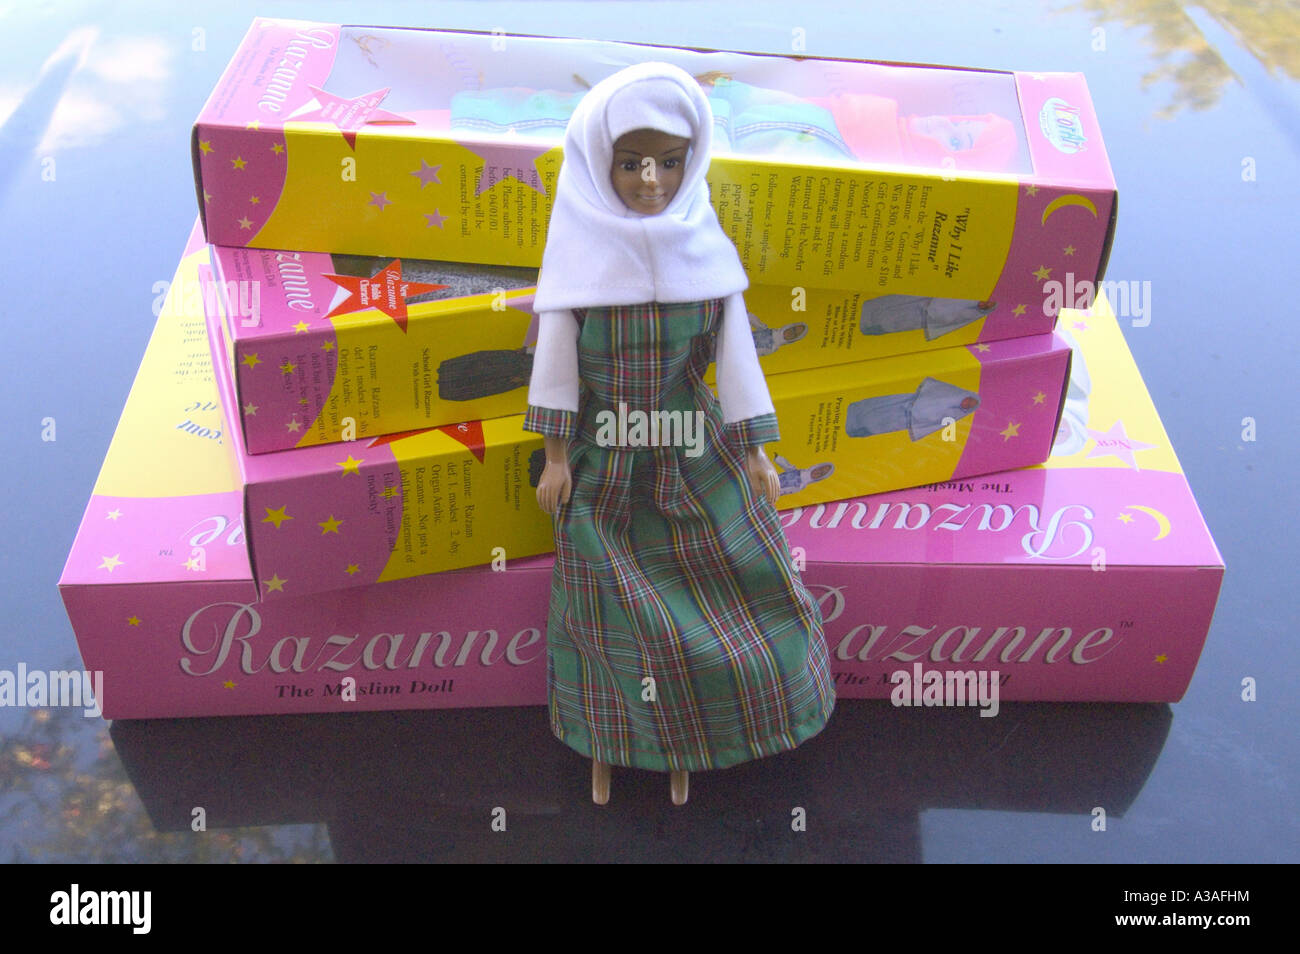 Razanne The Muslim Doll , With 3 others boxes Stock Photo